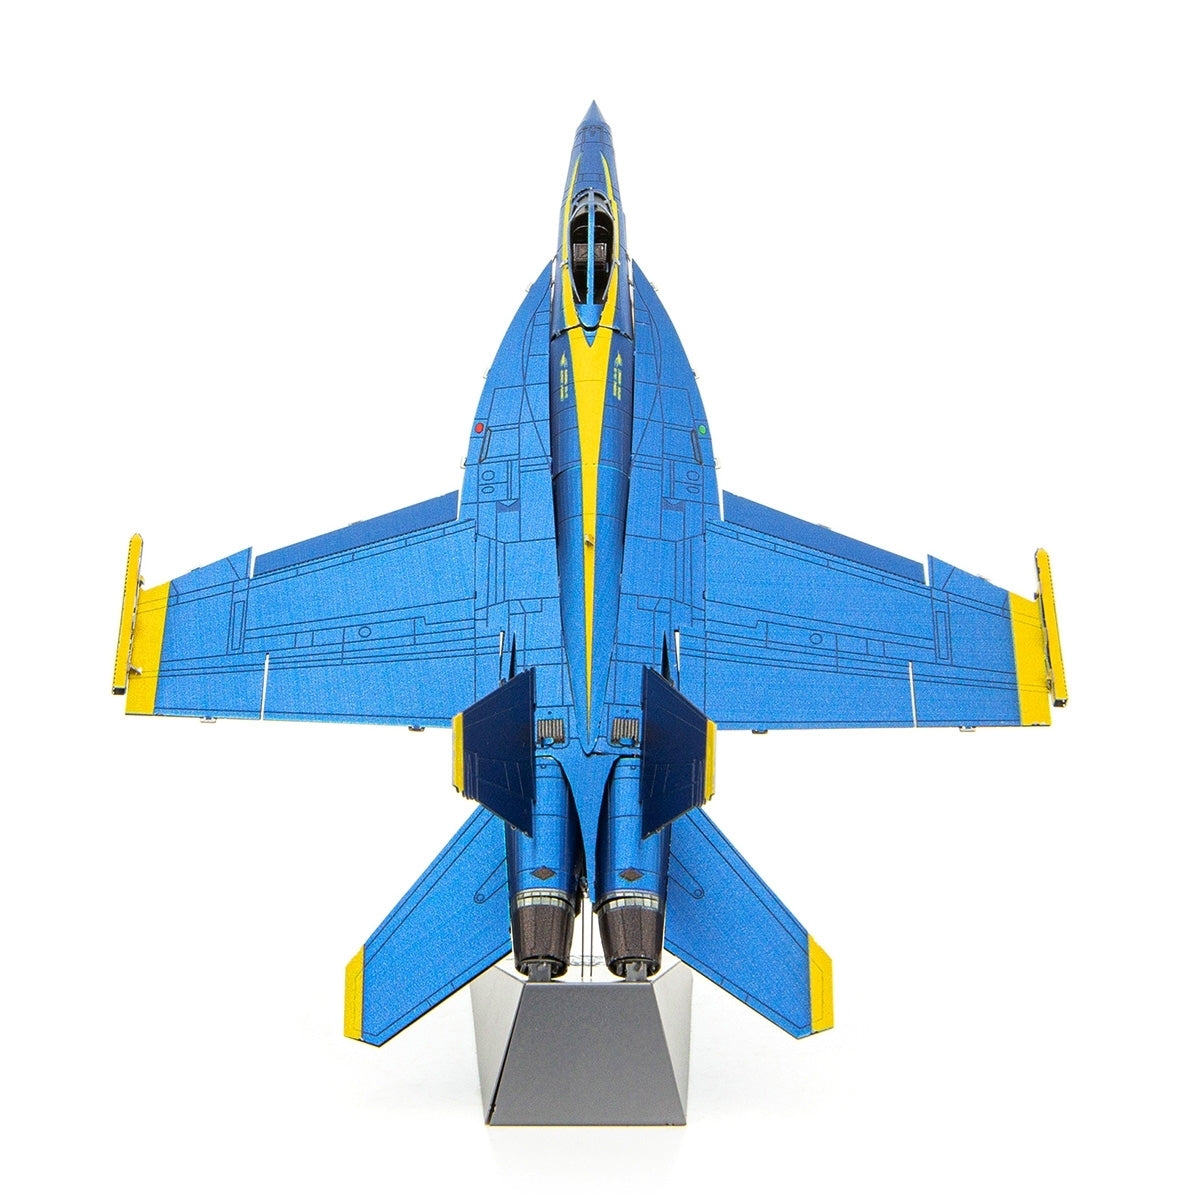 Boeing F/A-18 Super Hornet Angel Toy – The Boeing